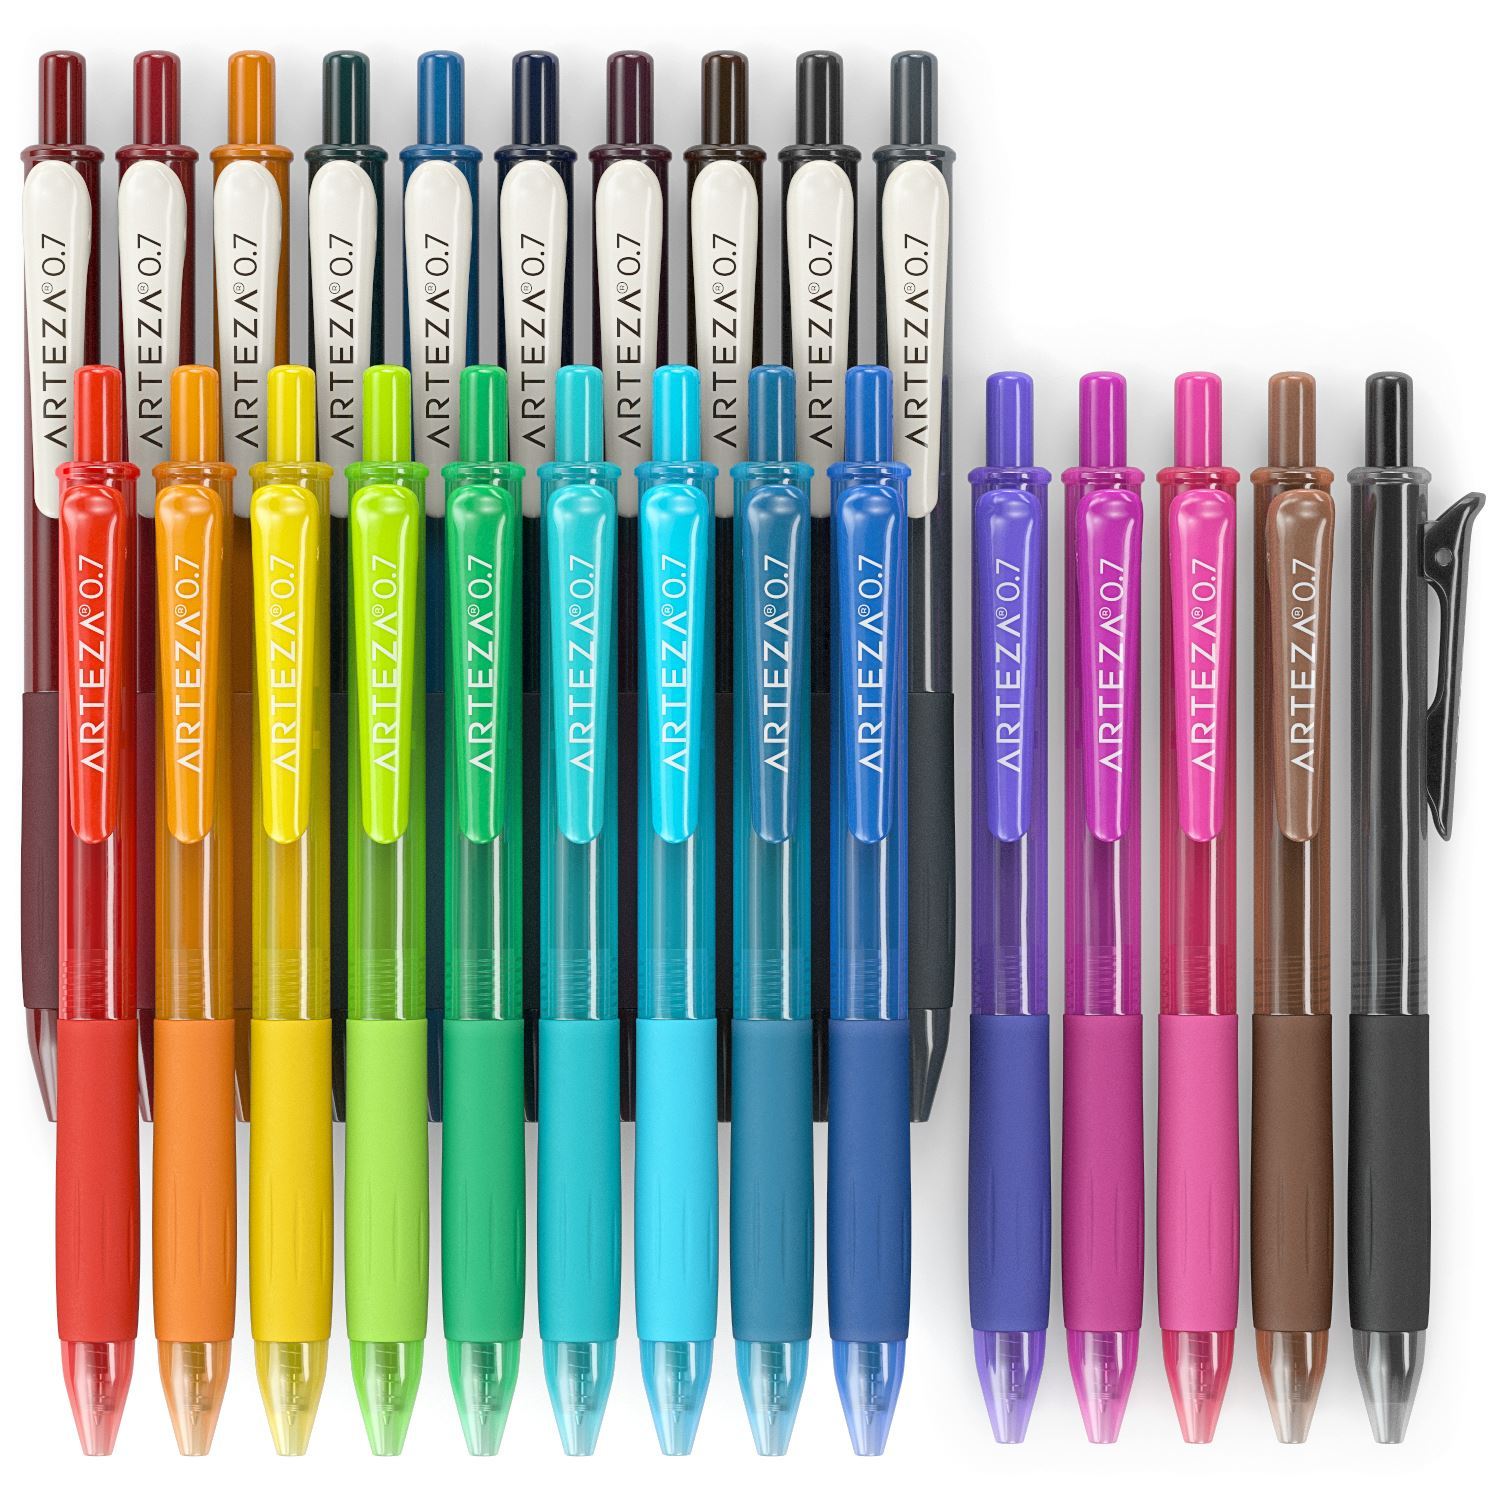 Archival Gel Pens, Graphic Pens, China Markers & Pencils